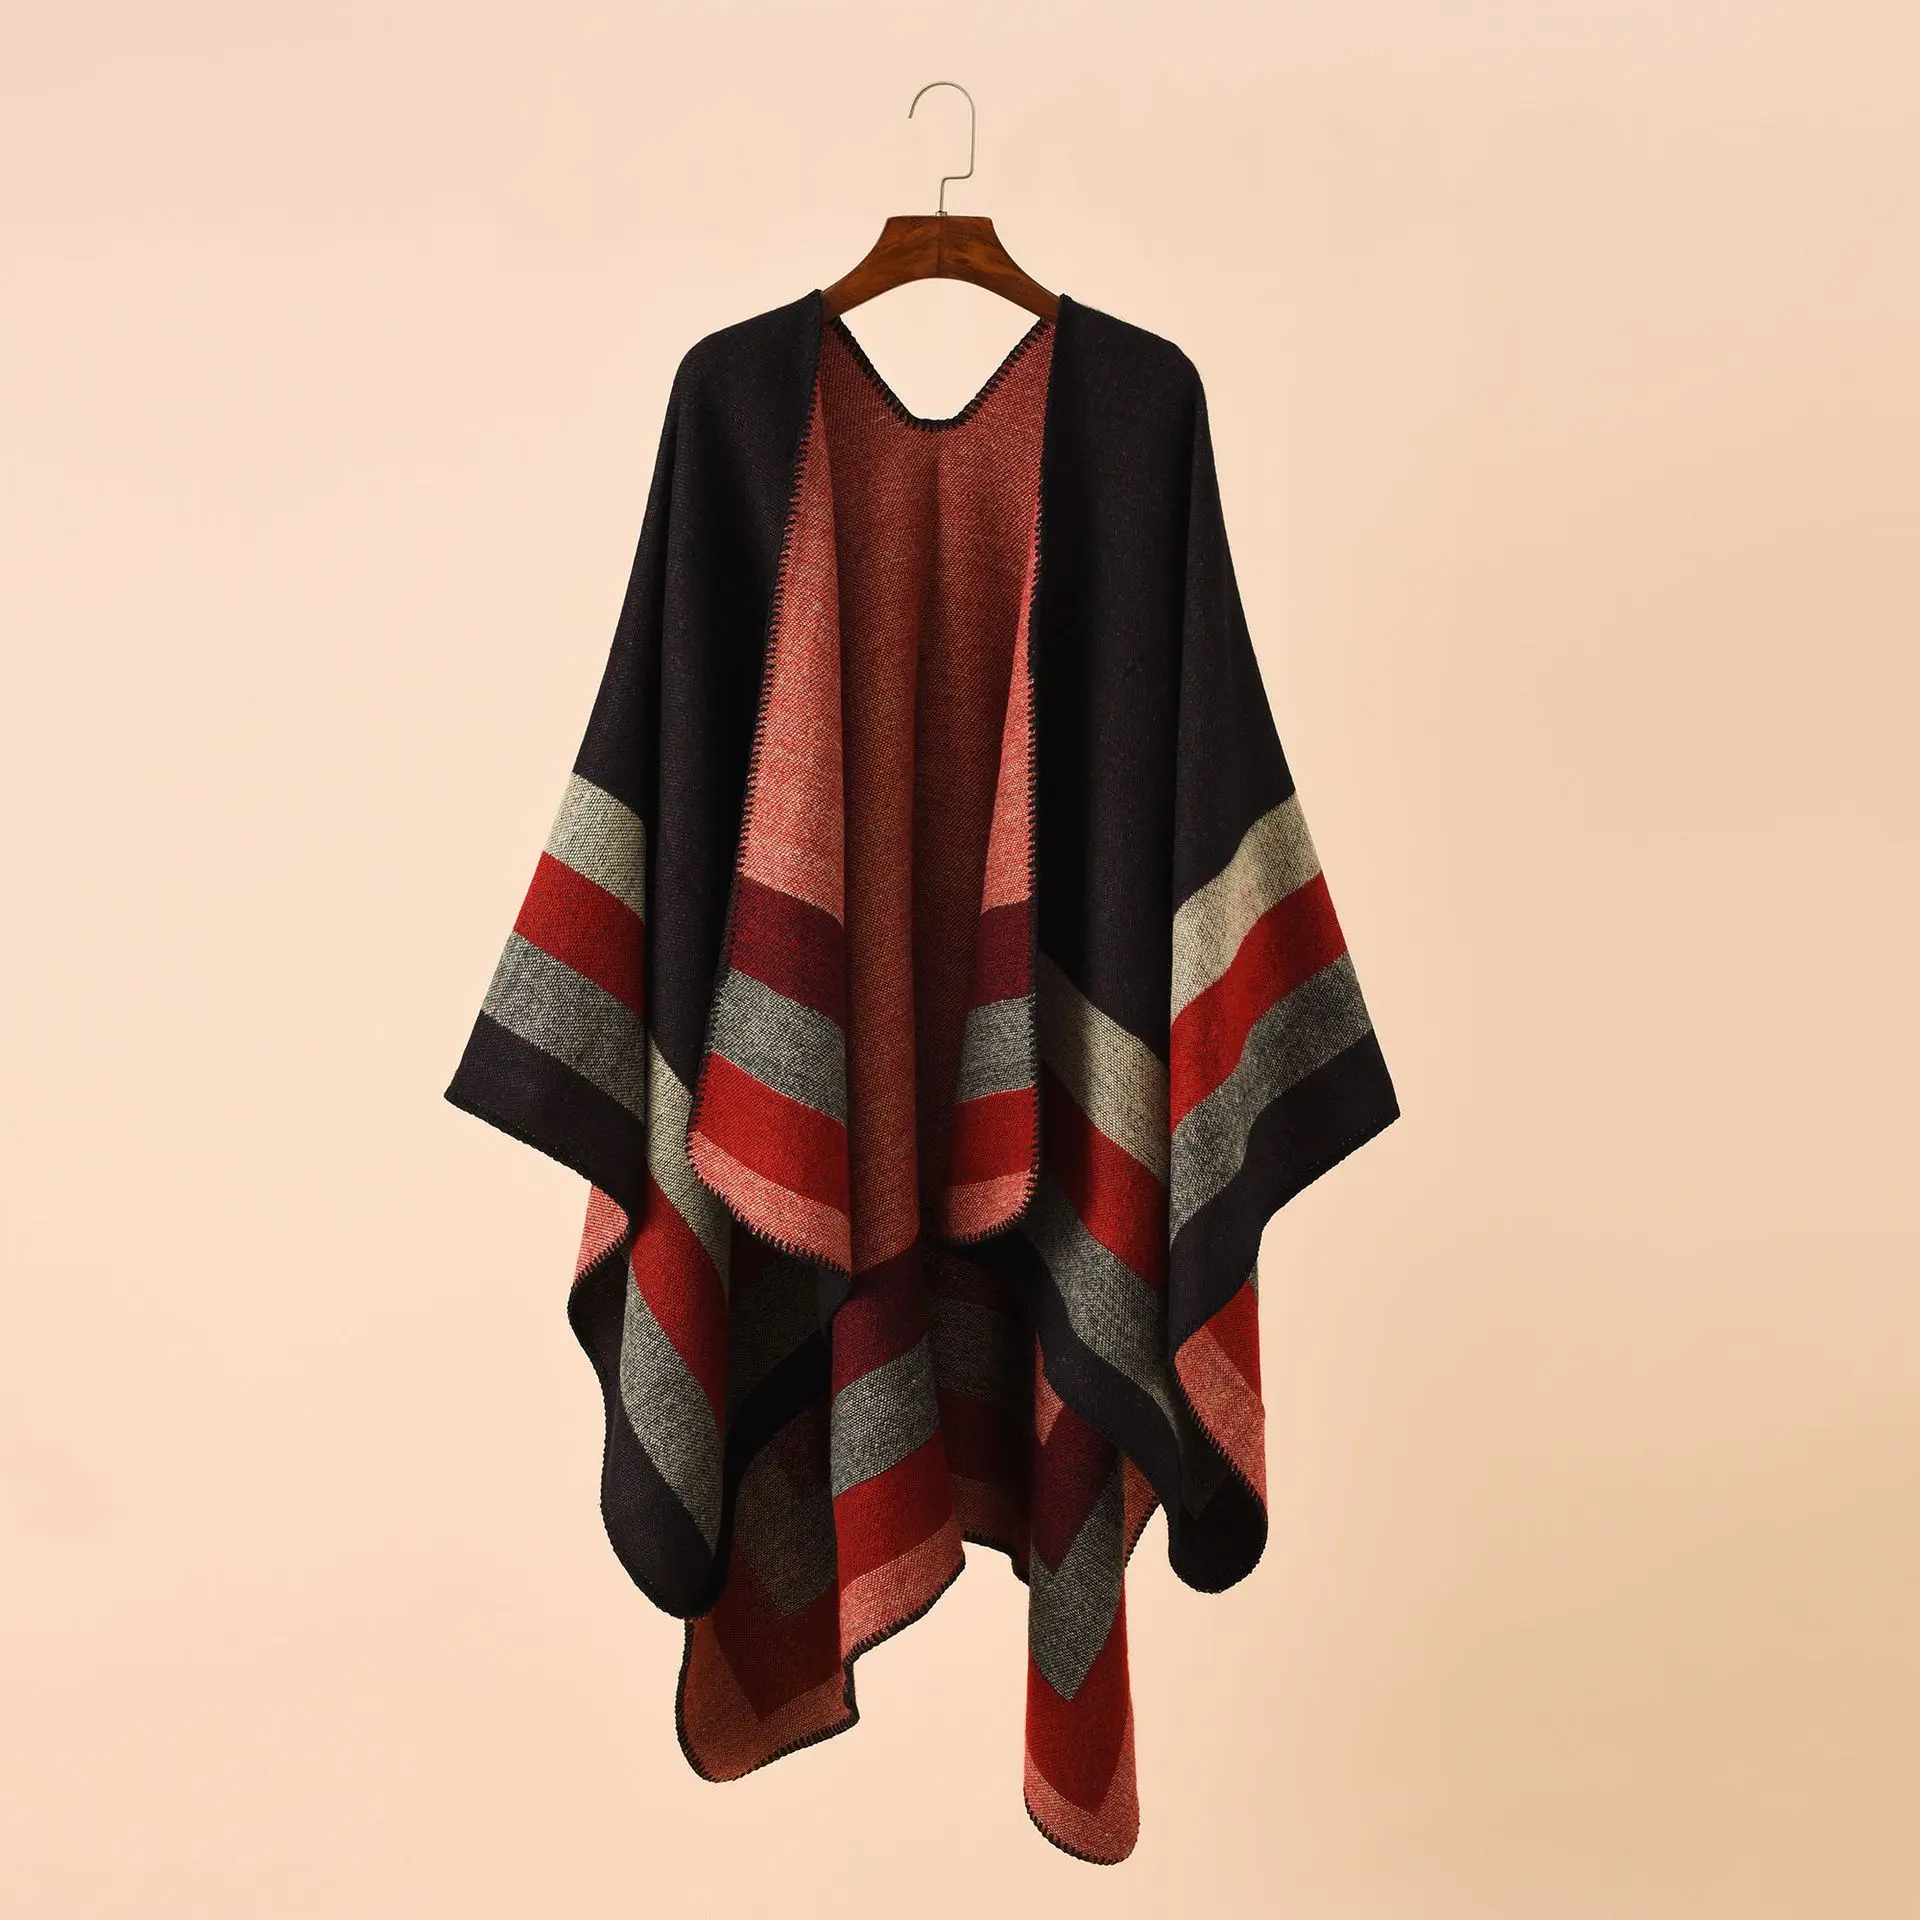 2022 New Fashion Winter Warm Plaid Ponchos And Capes For Women Oversized Shawls and Wraps Cashmere Pashmina Female Bufanda Mujer